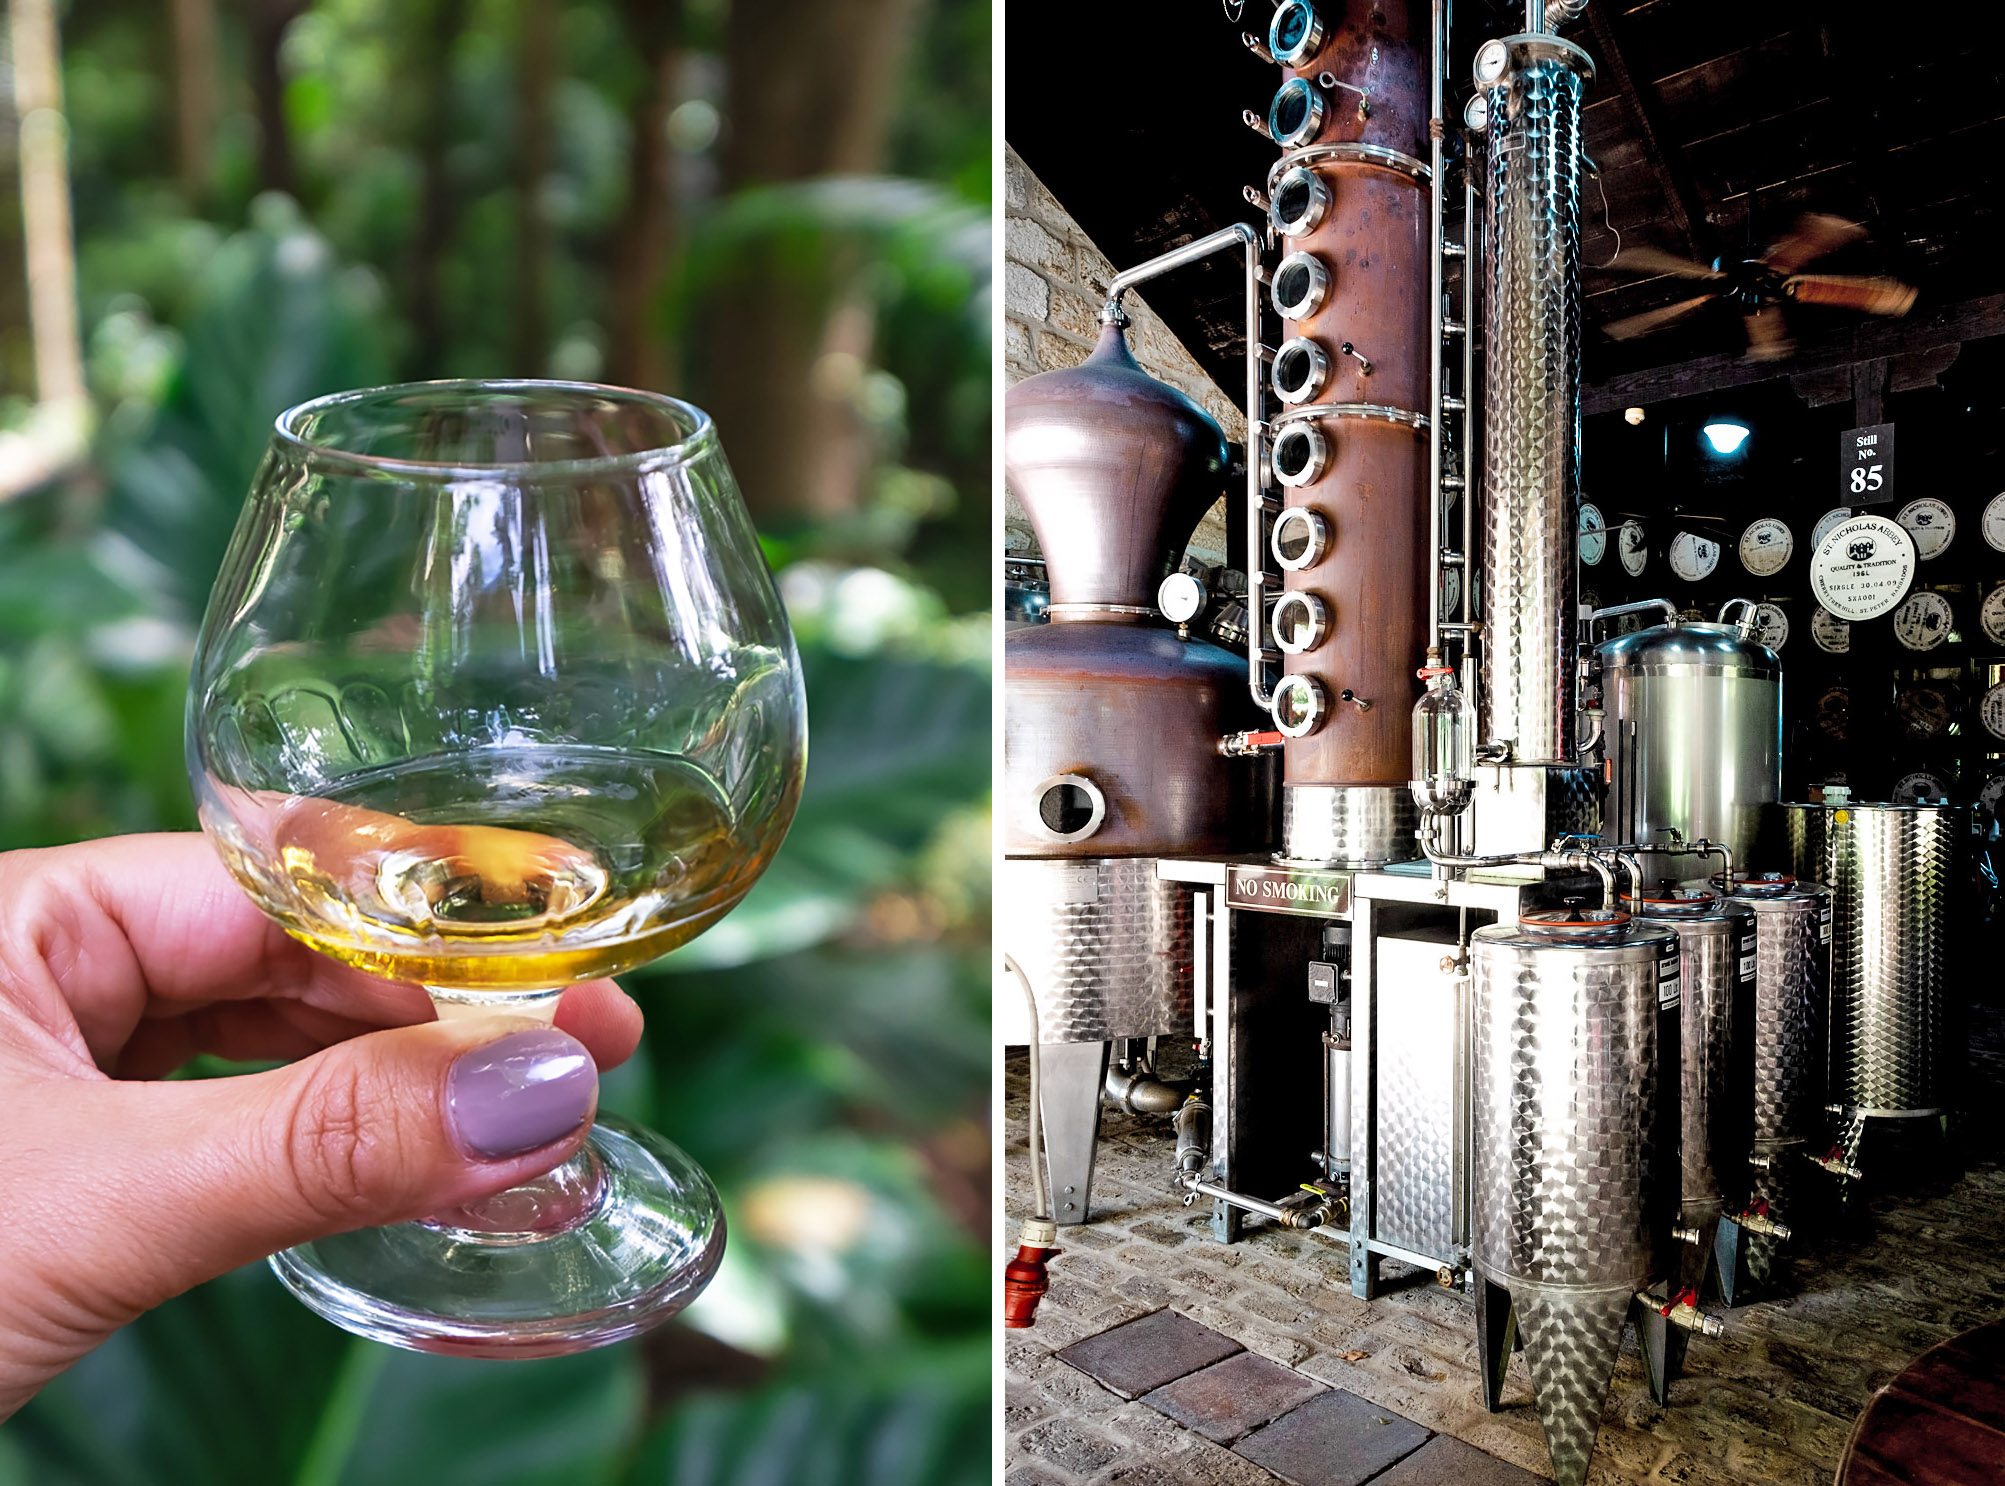 St Nicholas Abbey rum distillery | A 5-Day Itinerary of What to See and Eat around Barbados